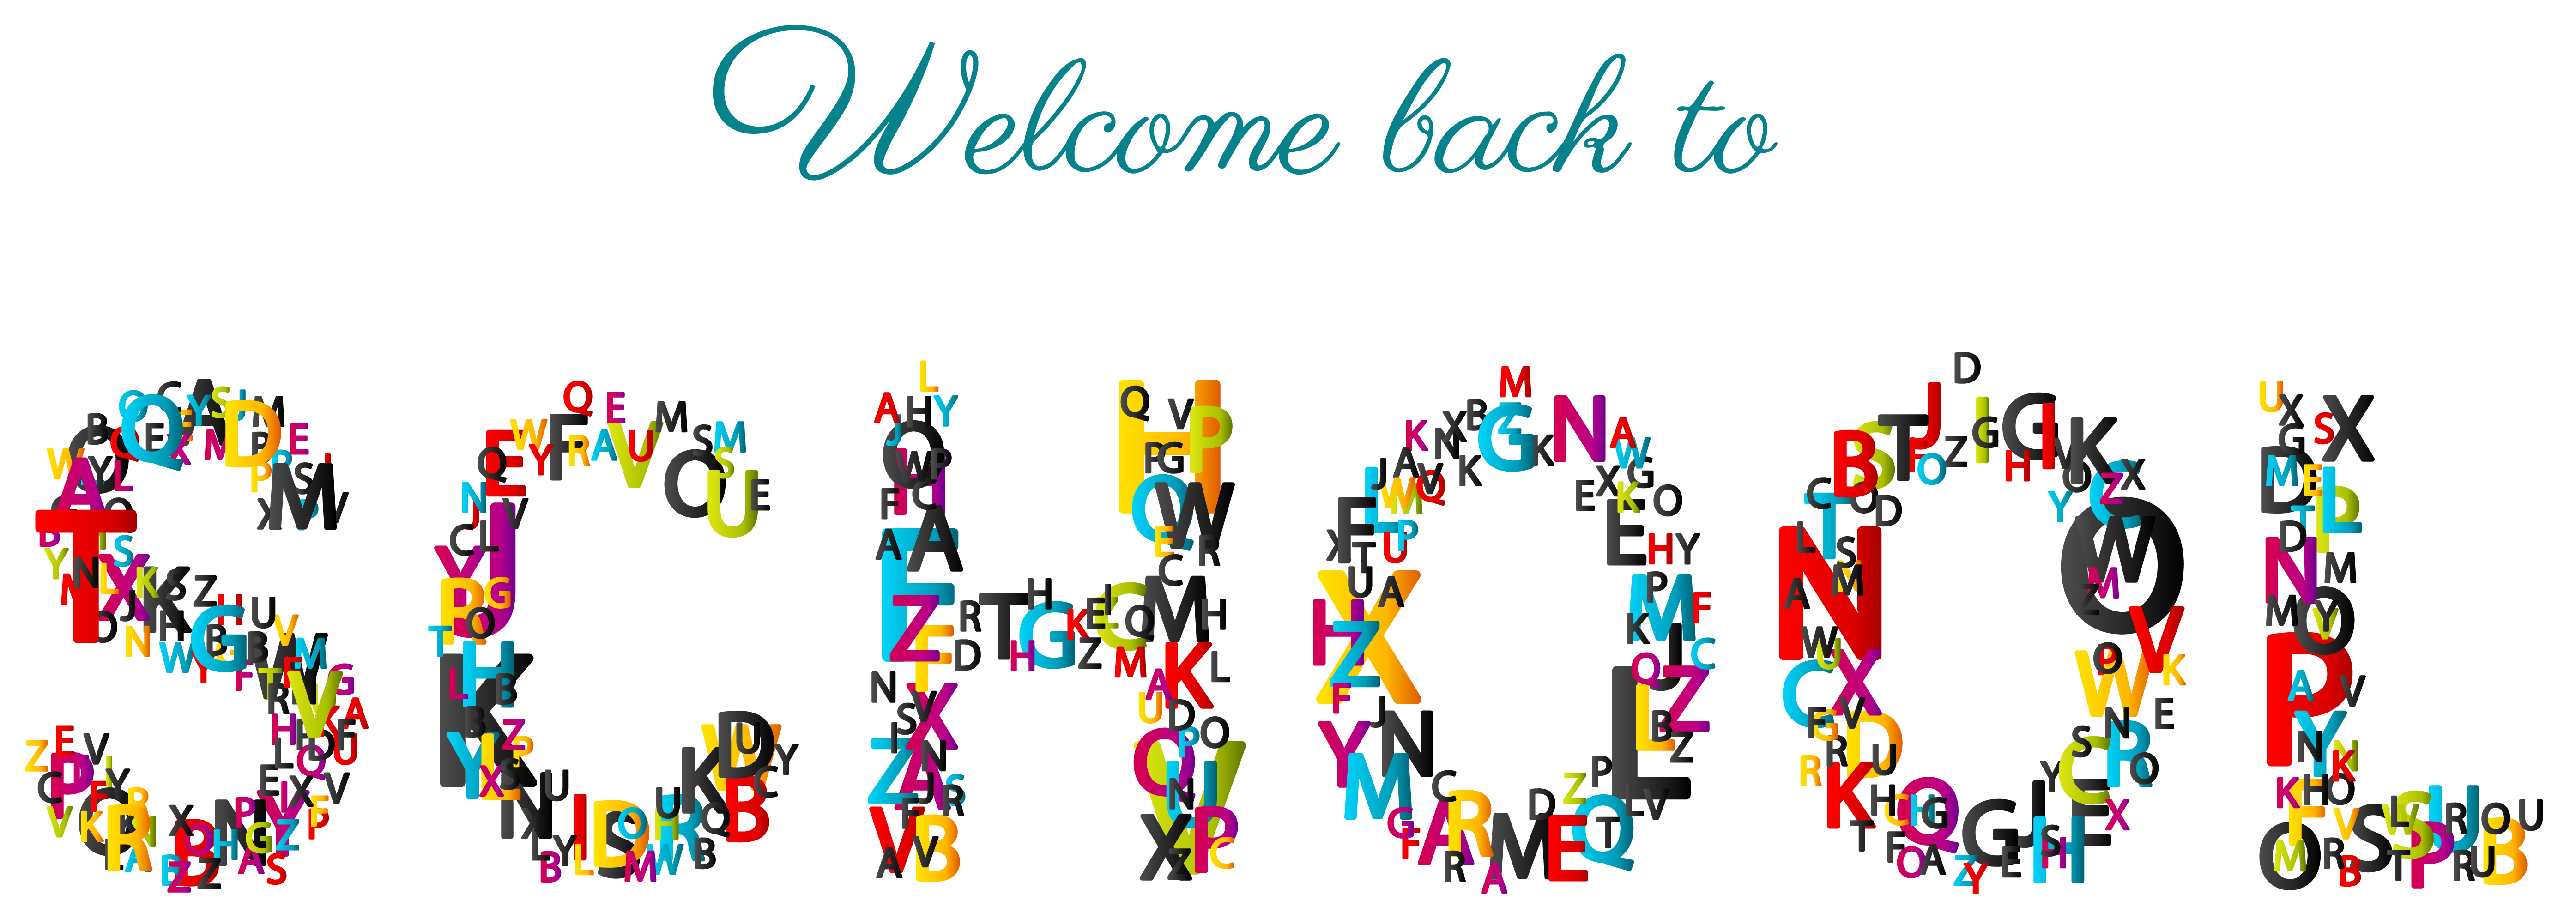 Welcome back to school clipart picture